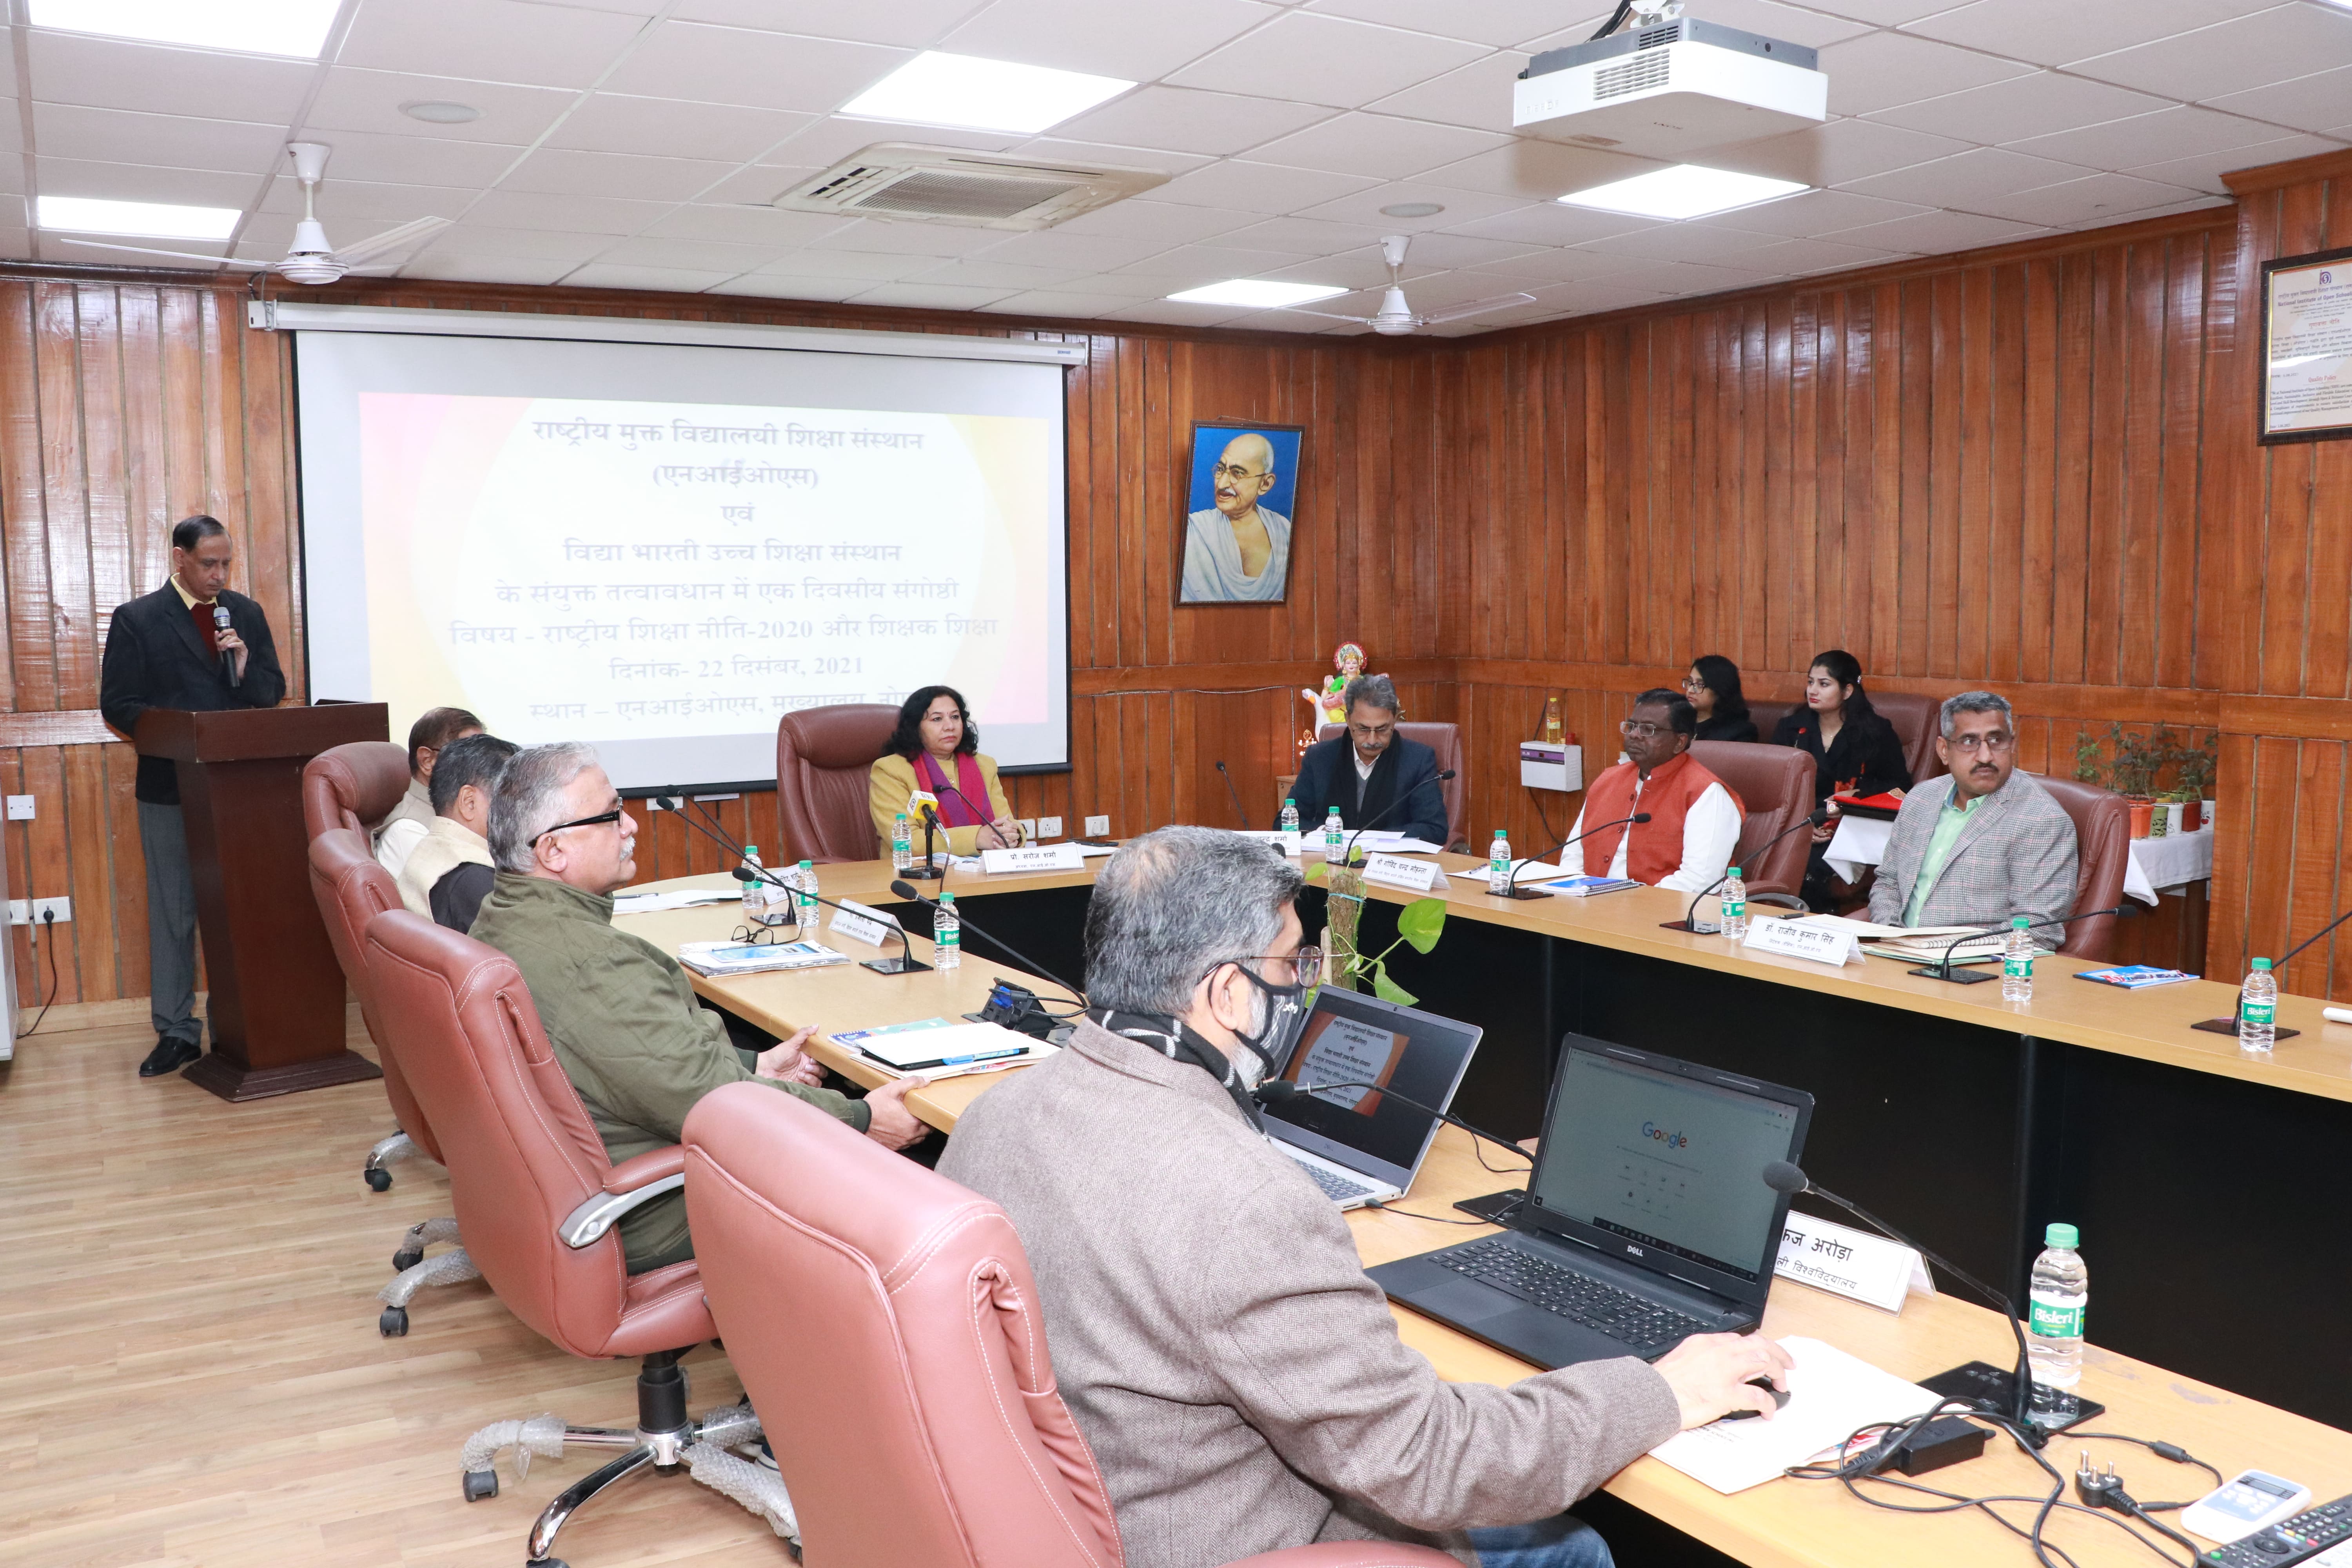 National Education Policy 2020 meeting on 22-23 December 2021